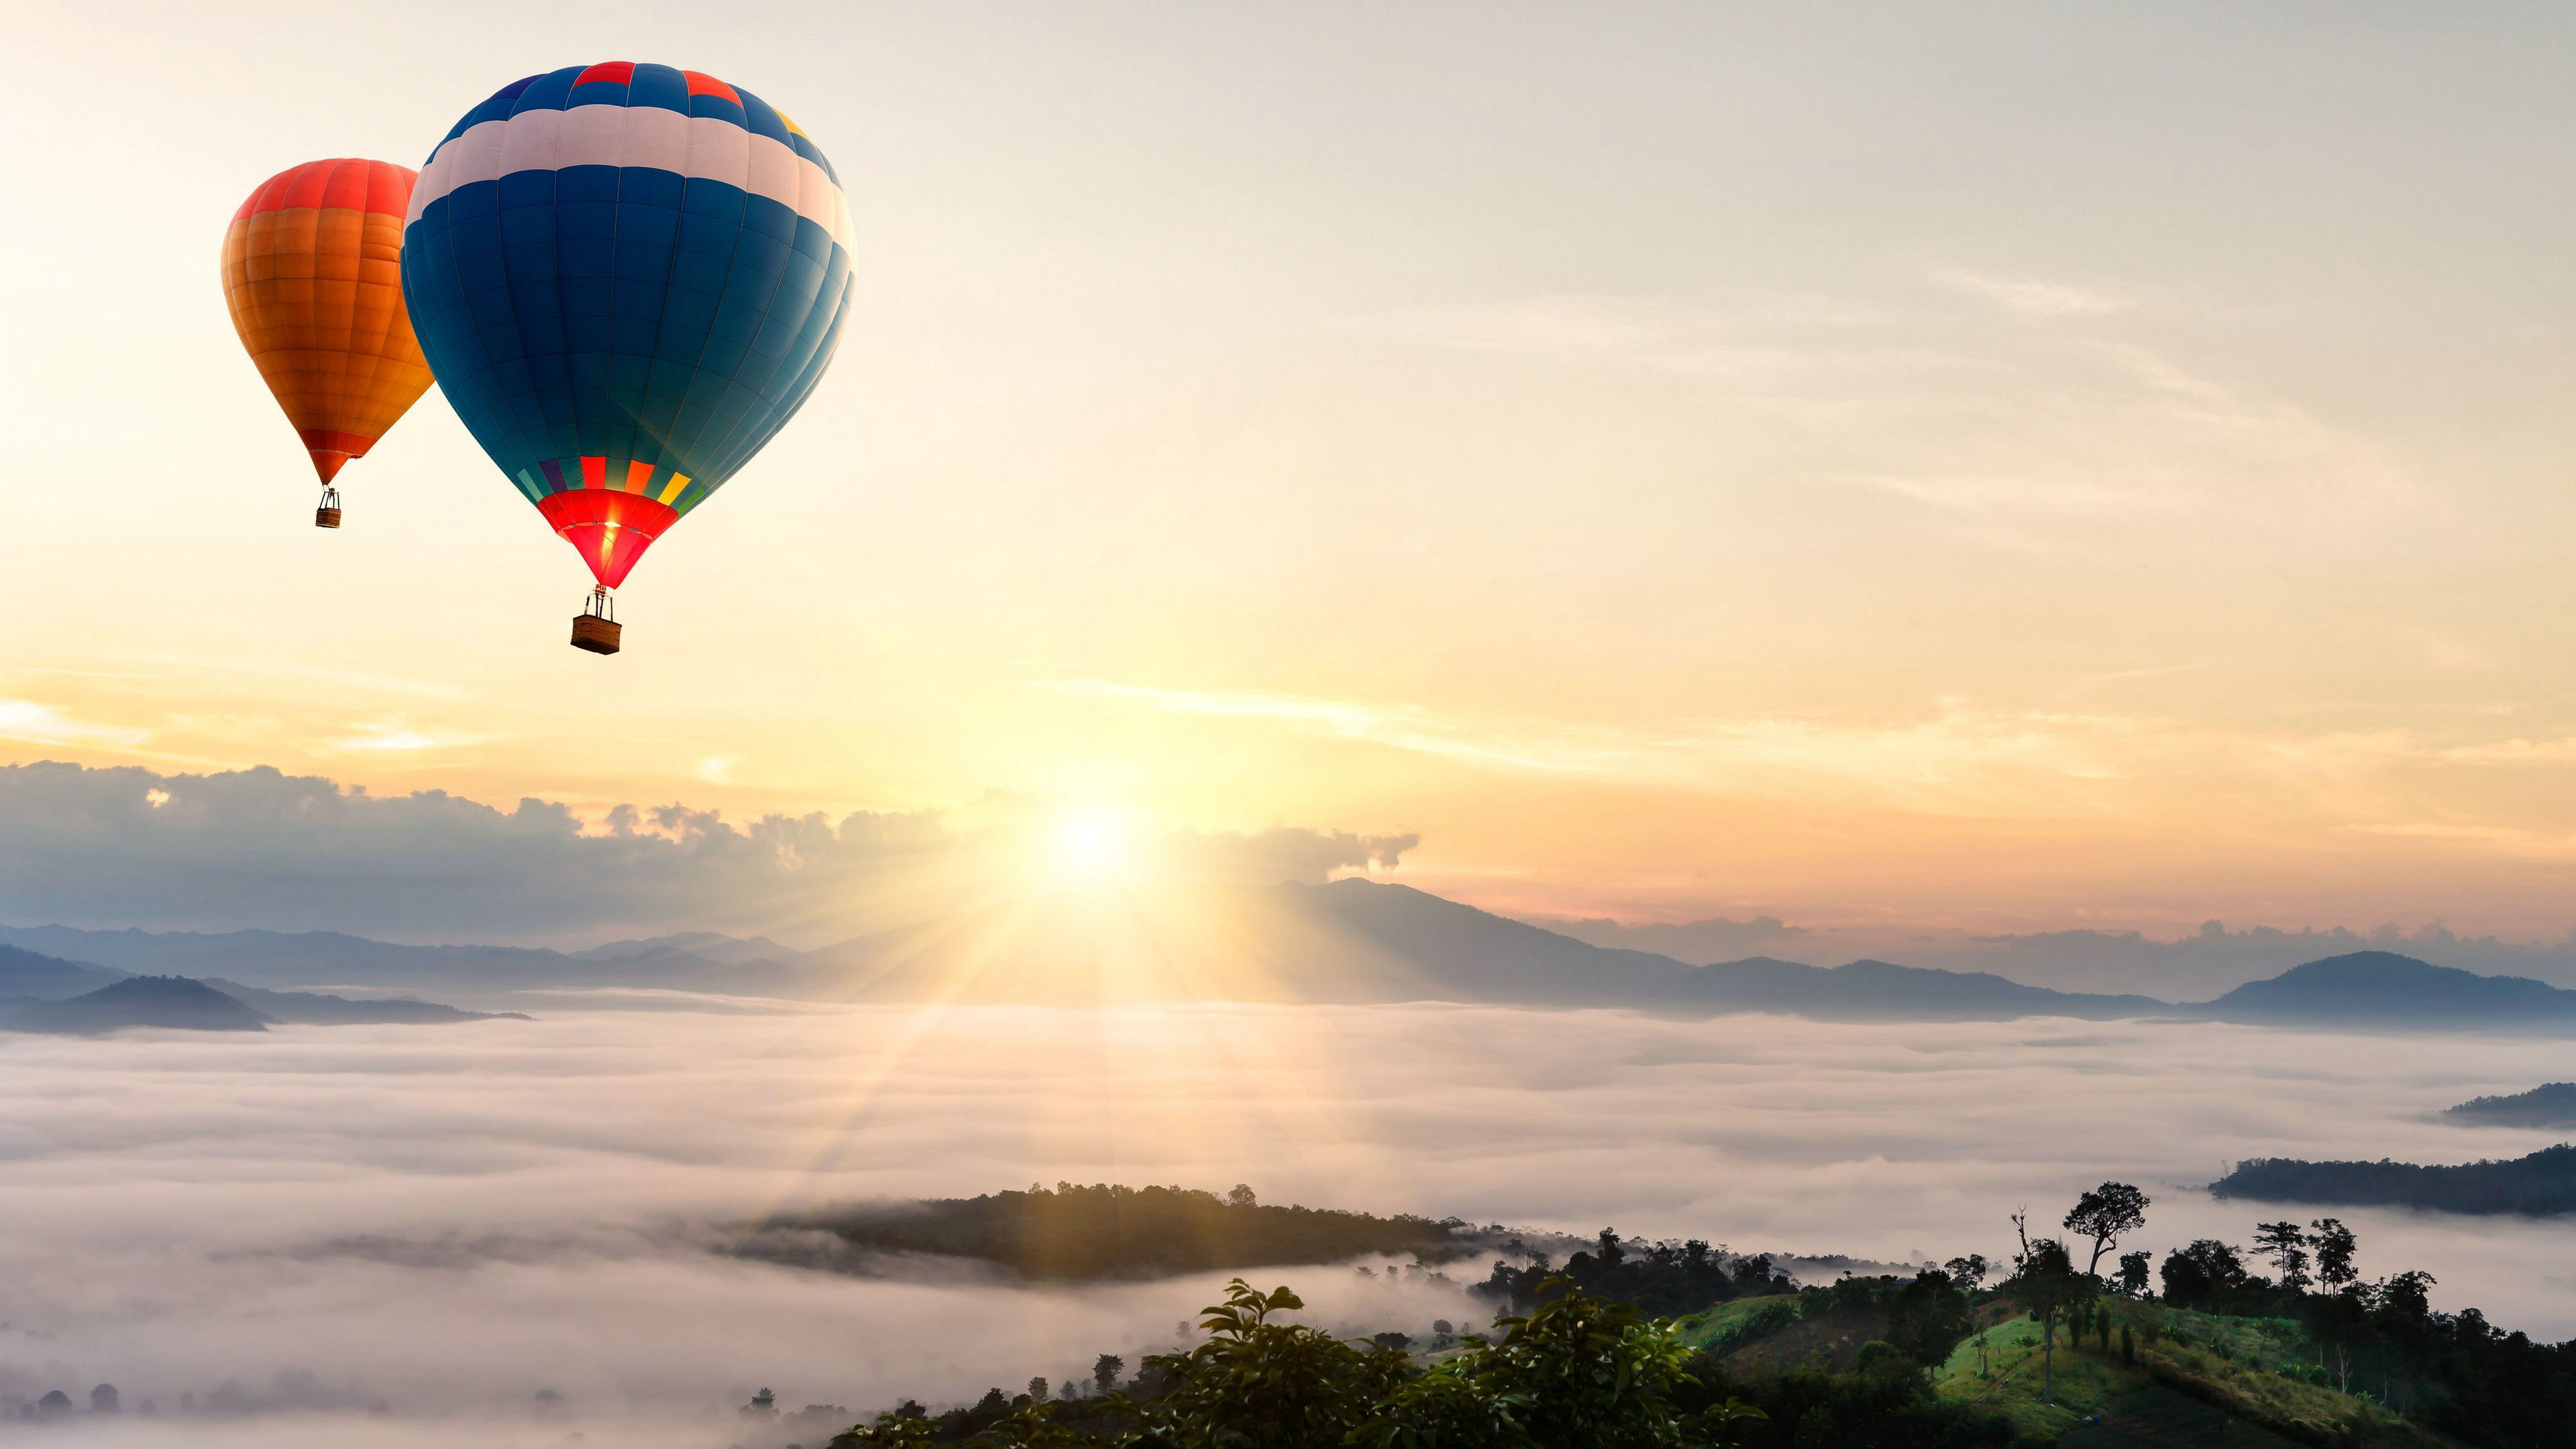 Hot Air Balloon: Flying Above The Clouds, A Picturesque Landscape, Balloon Rides. 3840x2160 4K Background.